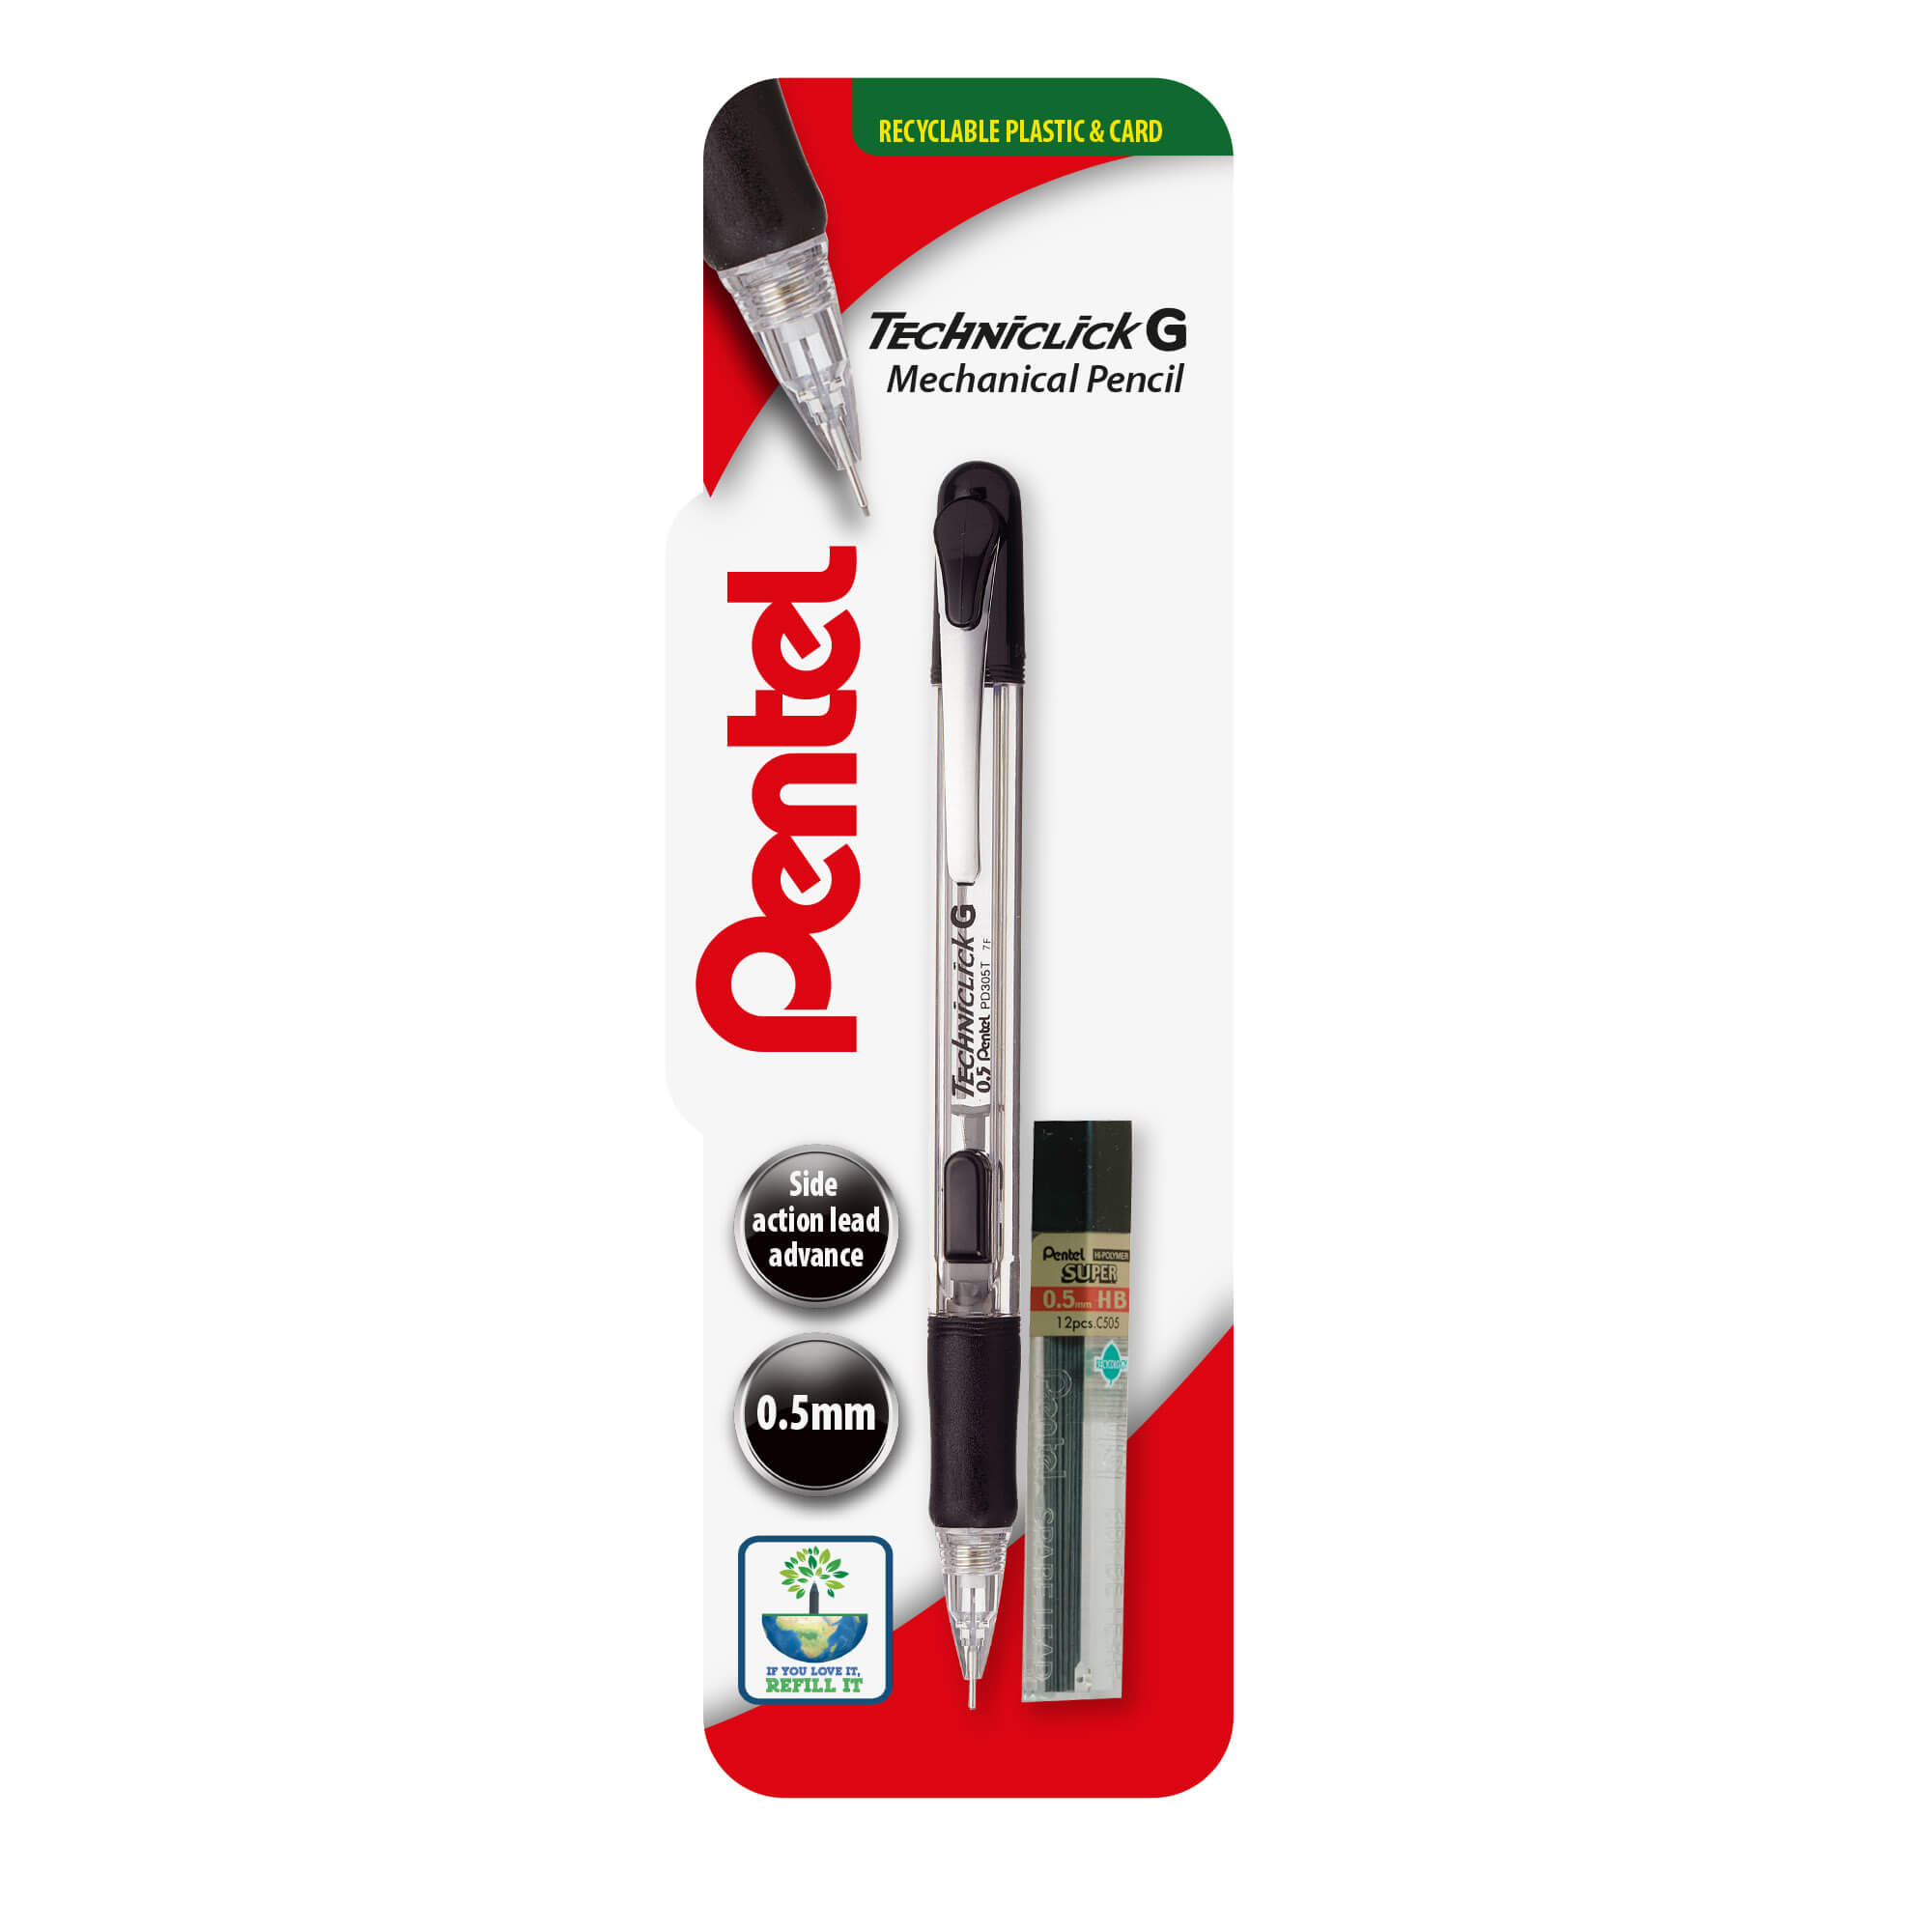 Pentel Techniclick G 0.5mm Mechanical pencil single blister card with tube of 0.5mm HB refill leads XPD305T